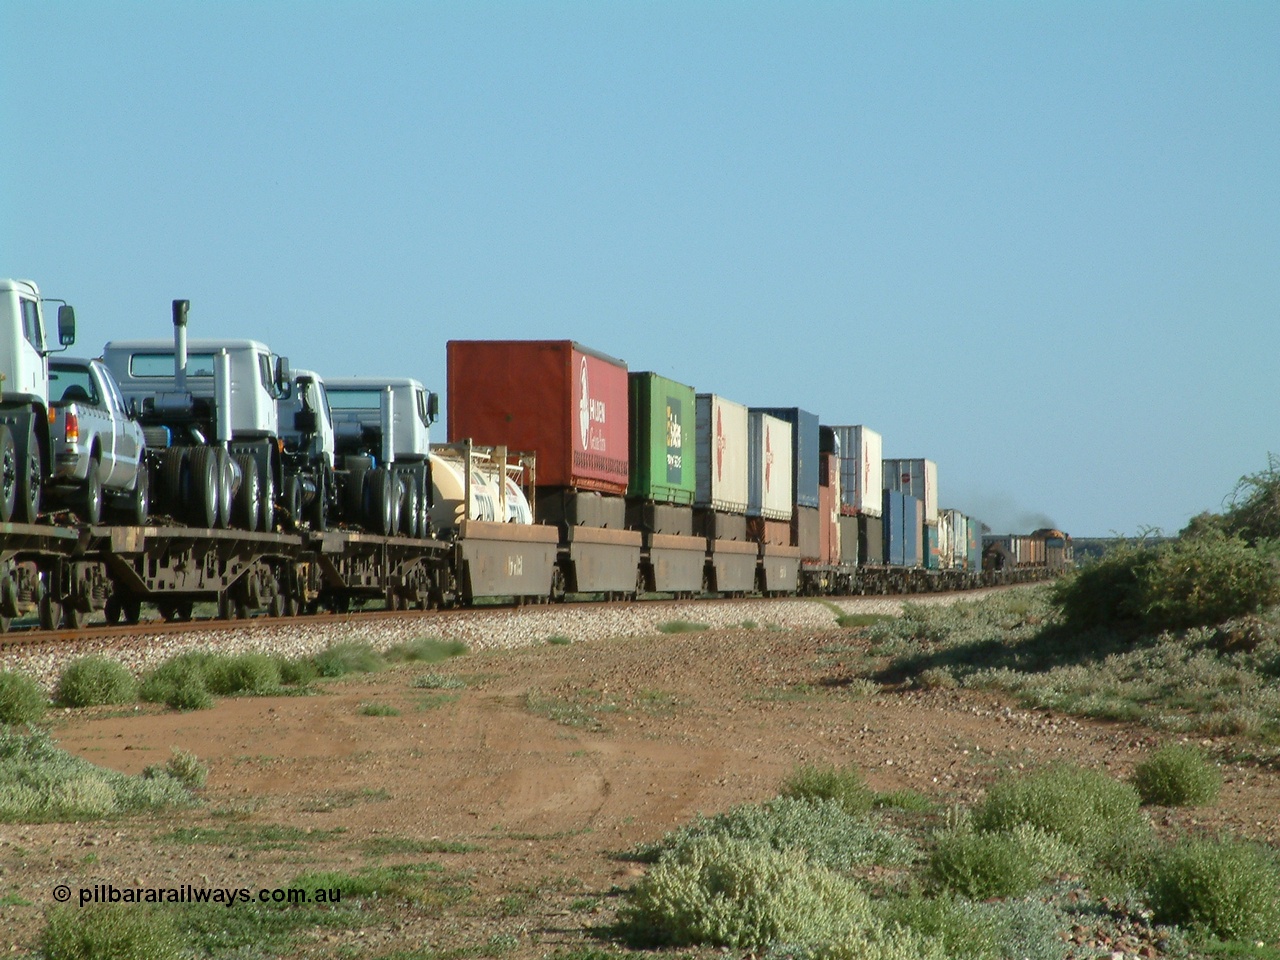 030404 082858
Port Germein, Perth bound steel and intermodal hurries through on the main behind National Rail's NR class units, showing one and a half stacking and new vehicles on flat waggons. 4th April 2003.
